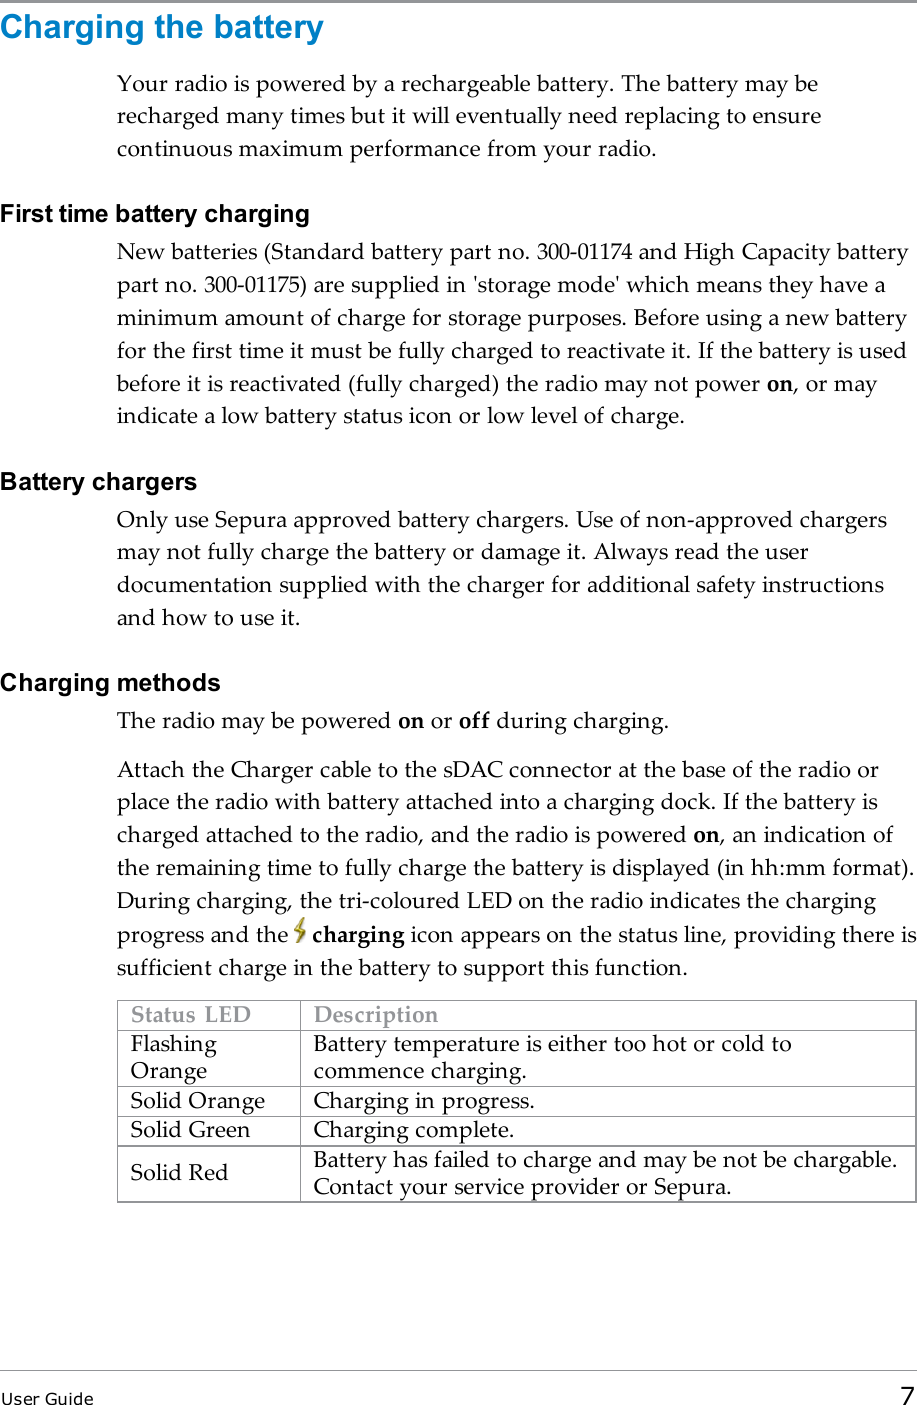 Charging the batteryYour radio is powered by a rechargeable battery. The battery may berecharged many times but it will eventually need replacing to ensurecontinuous maximum performance from your radio.First time battery chargingNew batteries (Standard battery part no. 300-01174 and High Capacity batterypart no. 300-01175) are supplied in &apos;storage mode&apos; which means they have aminimum amount of charge for storage purposes. Before using a new batteryfor the first time it must be fully charged to reactivate it. If the battery is usedbefore it is reactivated (fully charged) the radio may not power on, or mayindicate a low battery status icon or low level of charge.Battery chargersOnly use Sepura approved battery chargers. Use of non-approved chargersmay not fully charge the battery or damage it. Always read the userdocumentation supplied with the charger for additional safety instructionsand how to use it.Charging methodsThe radio may be powered on or off during charging.Attach the Charger cable to the sDAC connector at the base of the radio orplace the radio with battery attached into a charging dock. If the battery ischarged attached to the radio, and the radio is powered on, an indication ofthe remaining time to fully charge the battery is displayed (in hh:mm format).During charging, the tri-coloured LED on the radio indicates the chargingprogress and the charging icon appears on the status line, providing there issufficient charge in the battery to support this function.Status LED DescriptionFlashingOrangeBattery temperature is either too hot or cold tocommence charging.Solid Orange Charging in progress.Solid Green Charging complete.Solid Red Battery has failed to charge and may be not be chargable.Contact your service provider or Sepura.User Guide 7